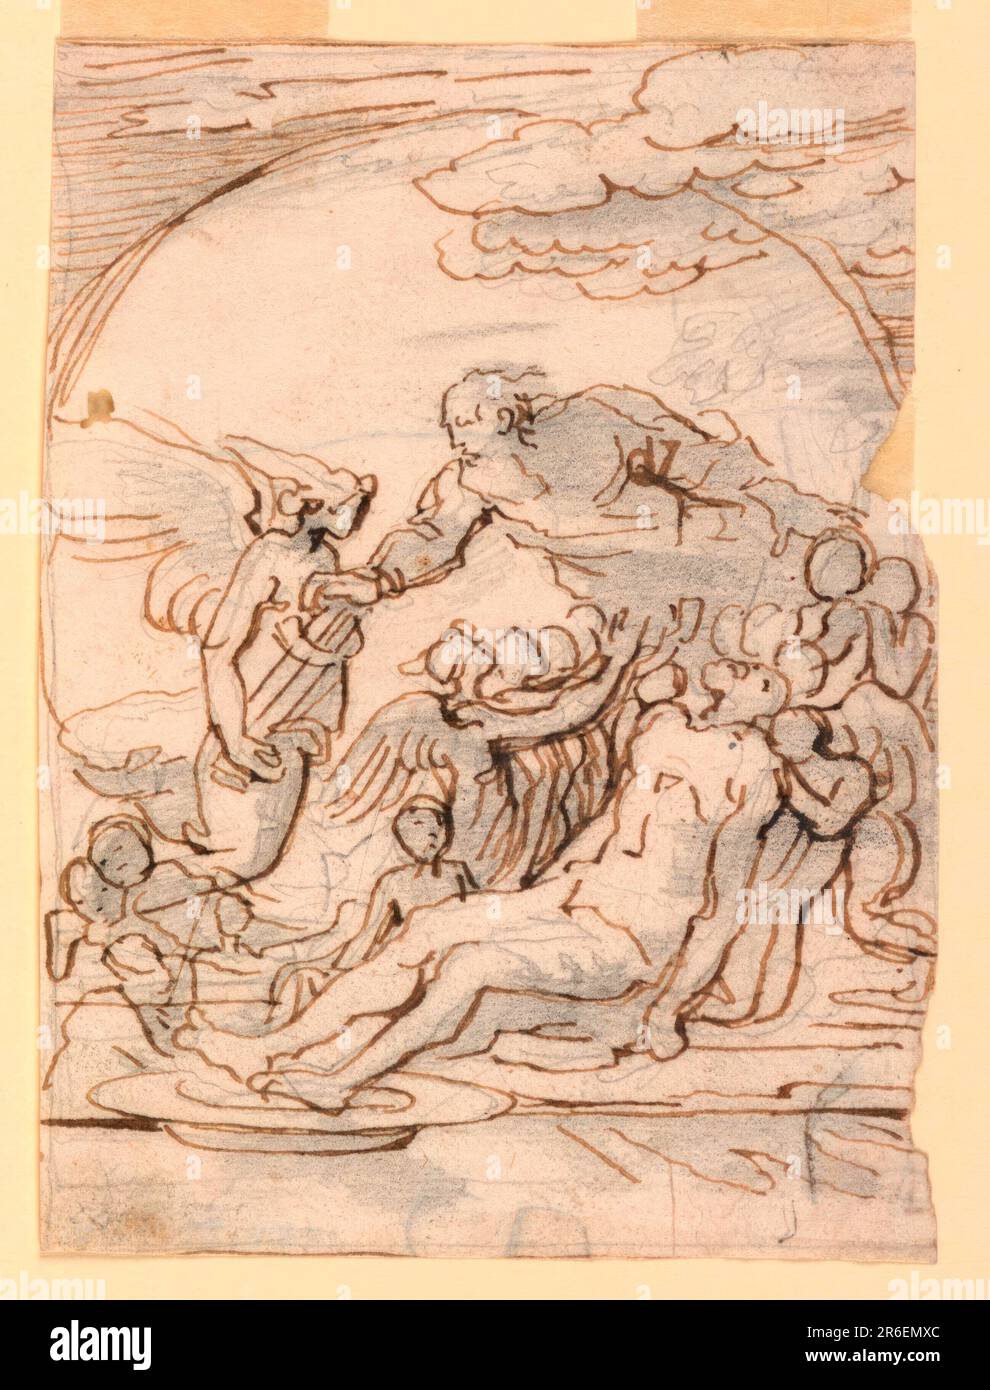 Sketch, Deposition (?) with Heavenly Figures. Date: 1820-1850. Pen and ink, graphite, on paper. Museum: Cooper Hewitt, Smithsonian Design Museum. Stock Photo